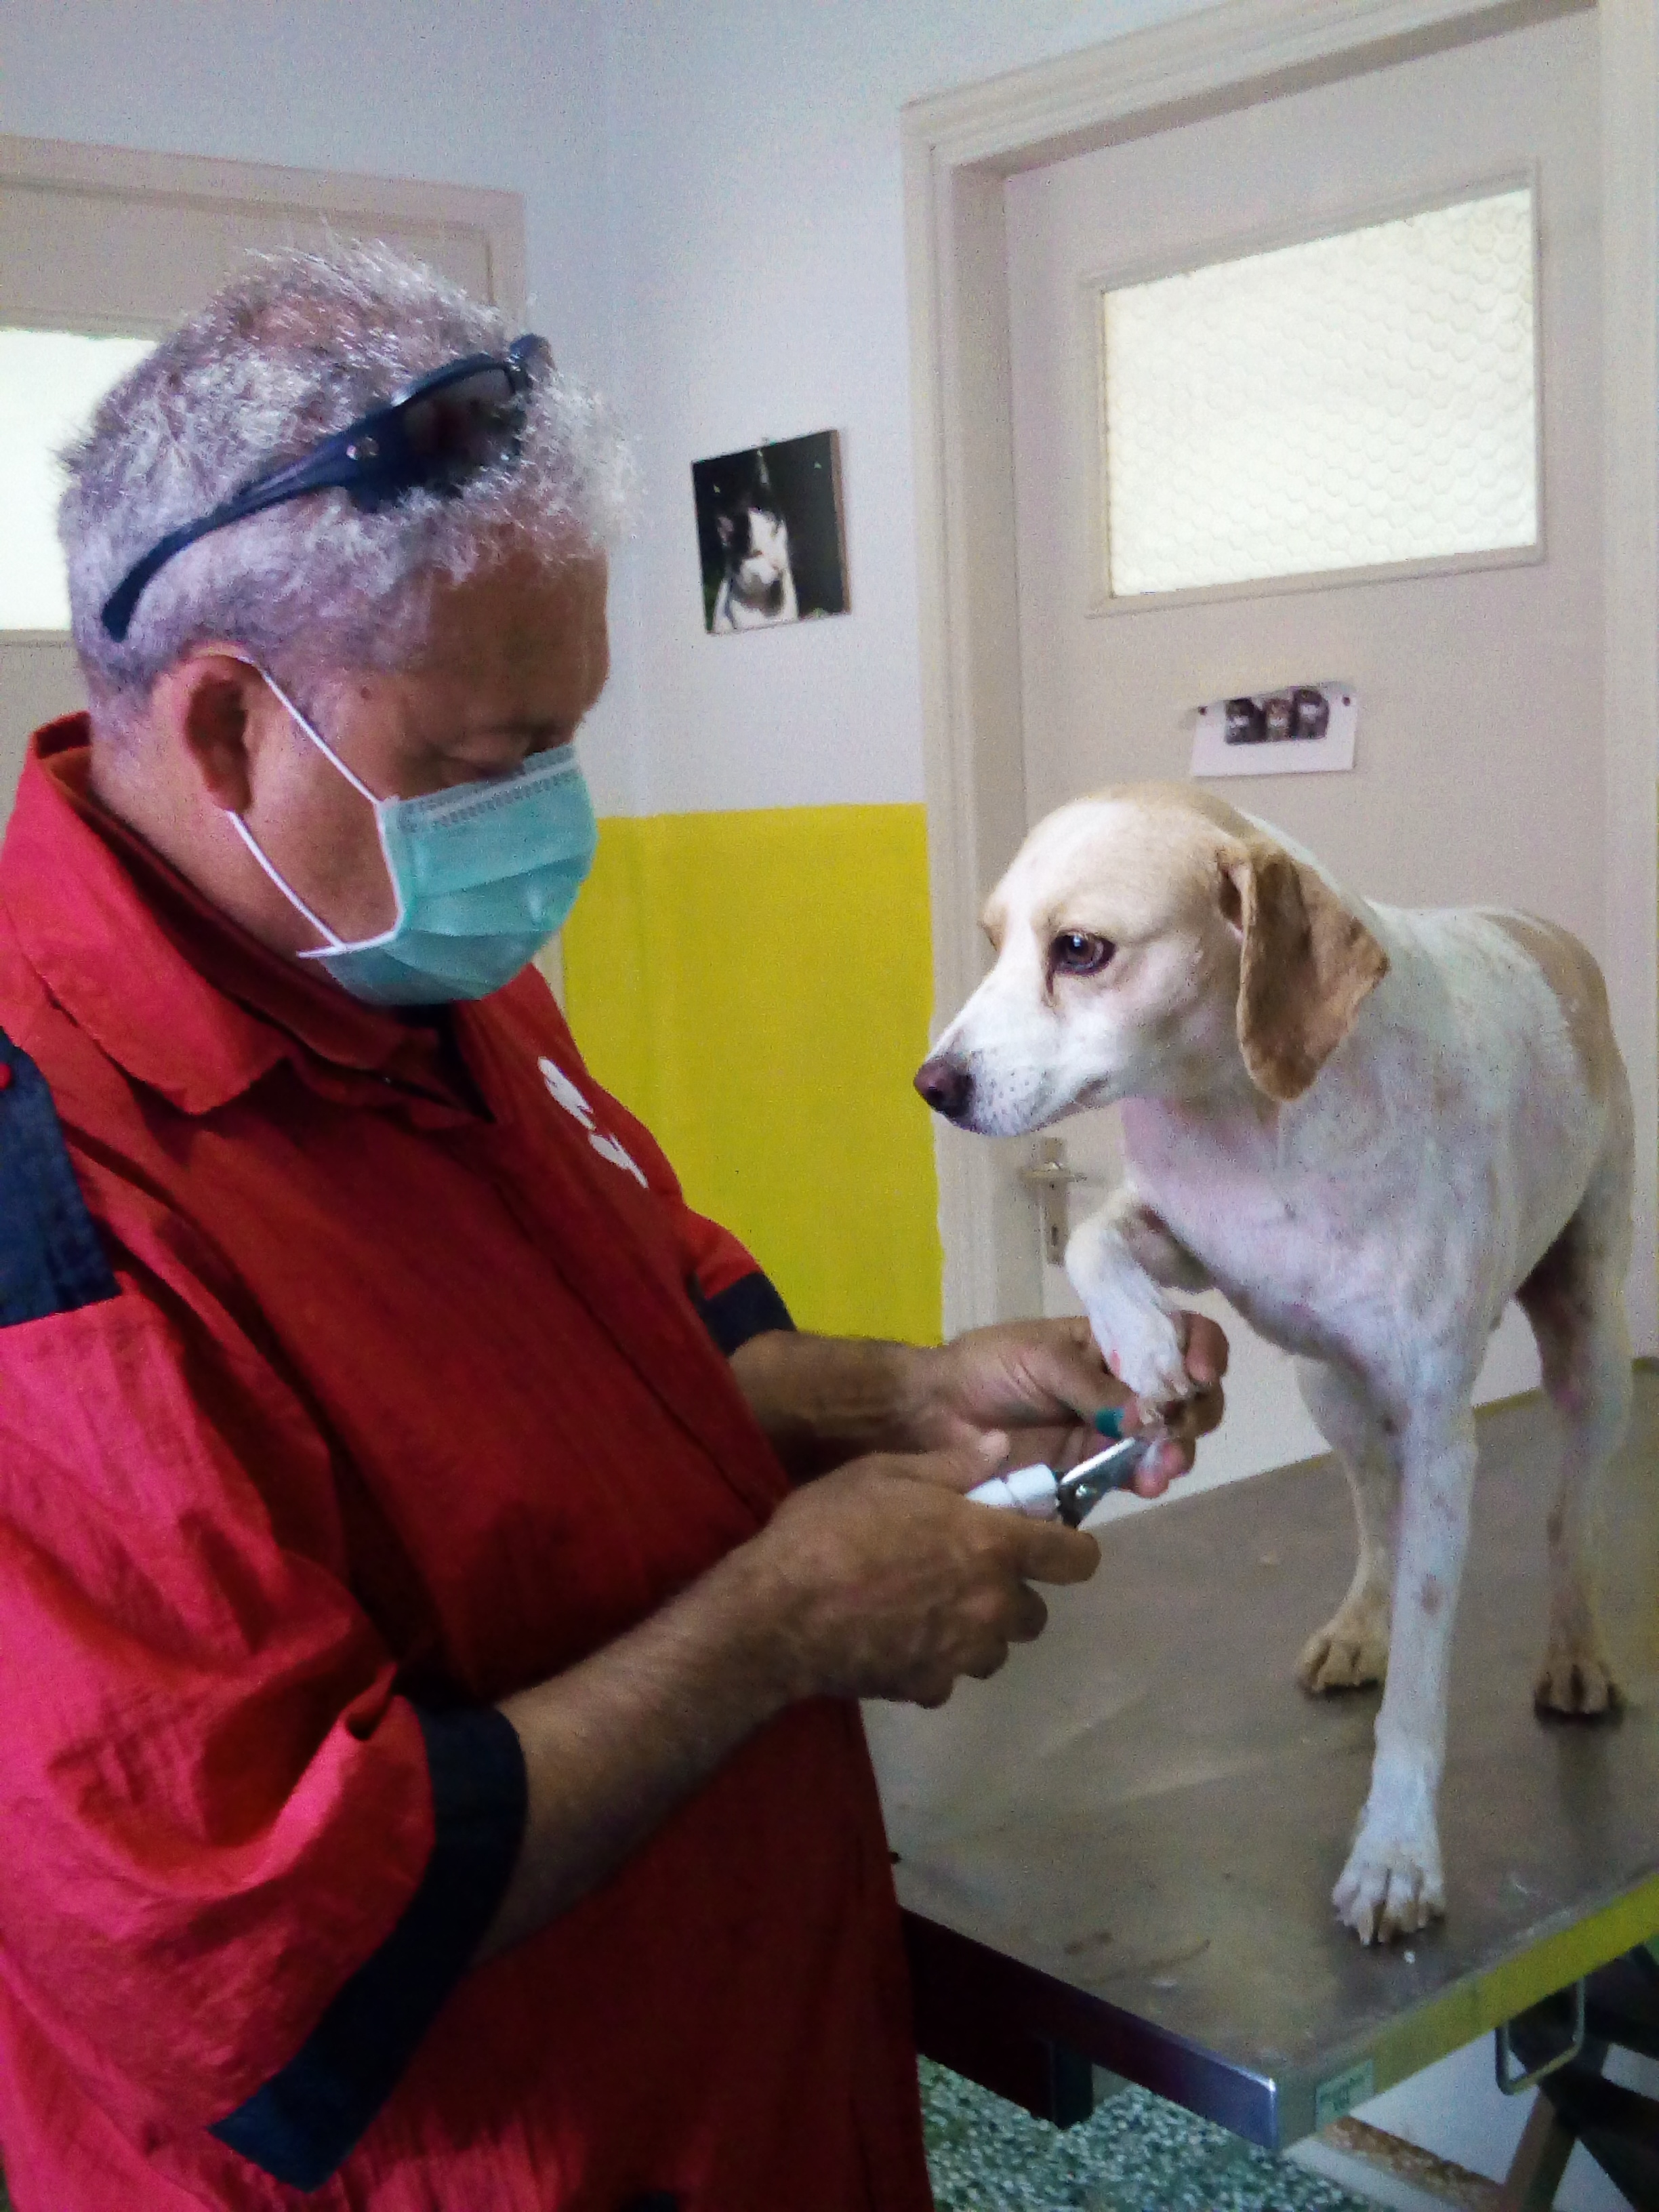 Dr. Vasalakis cuts the nails of our dog Liza